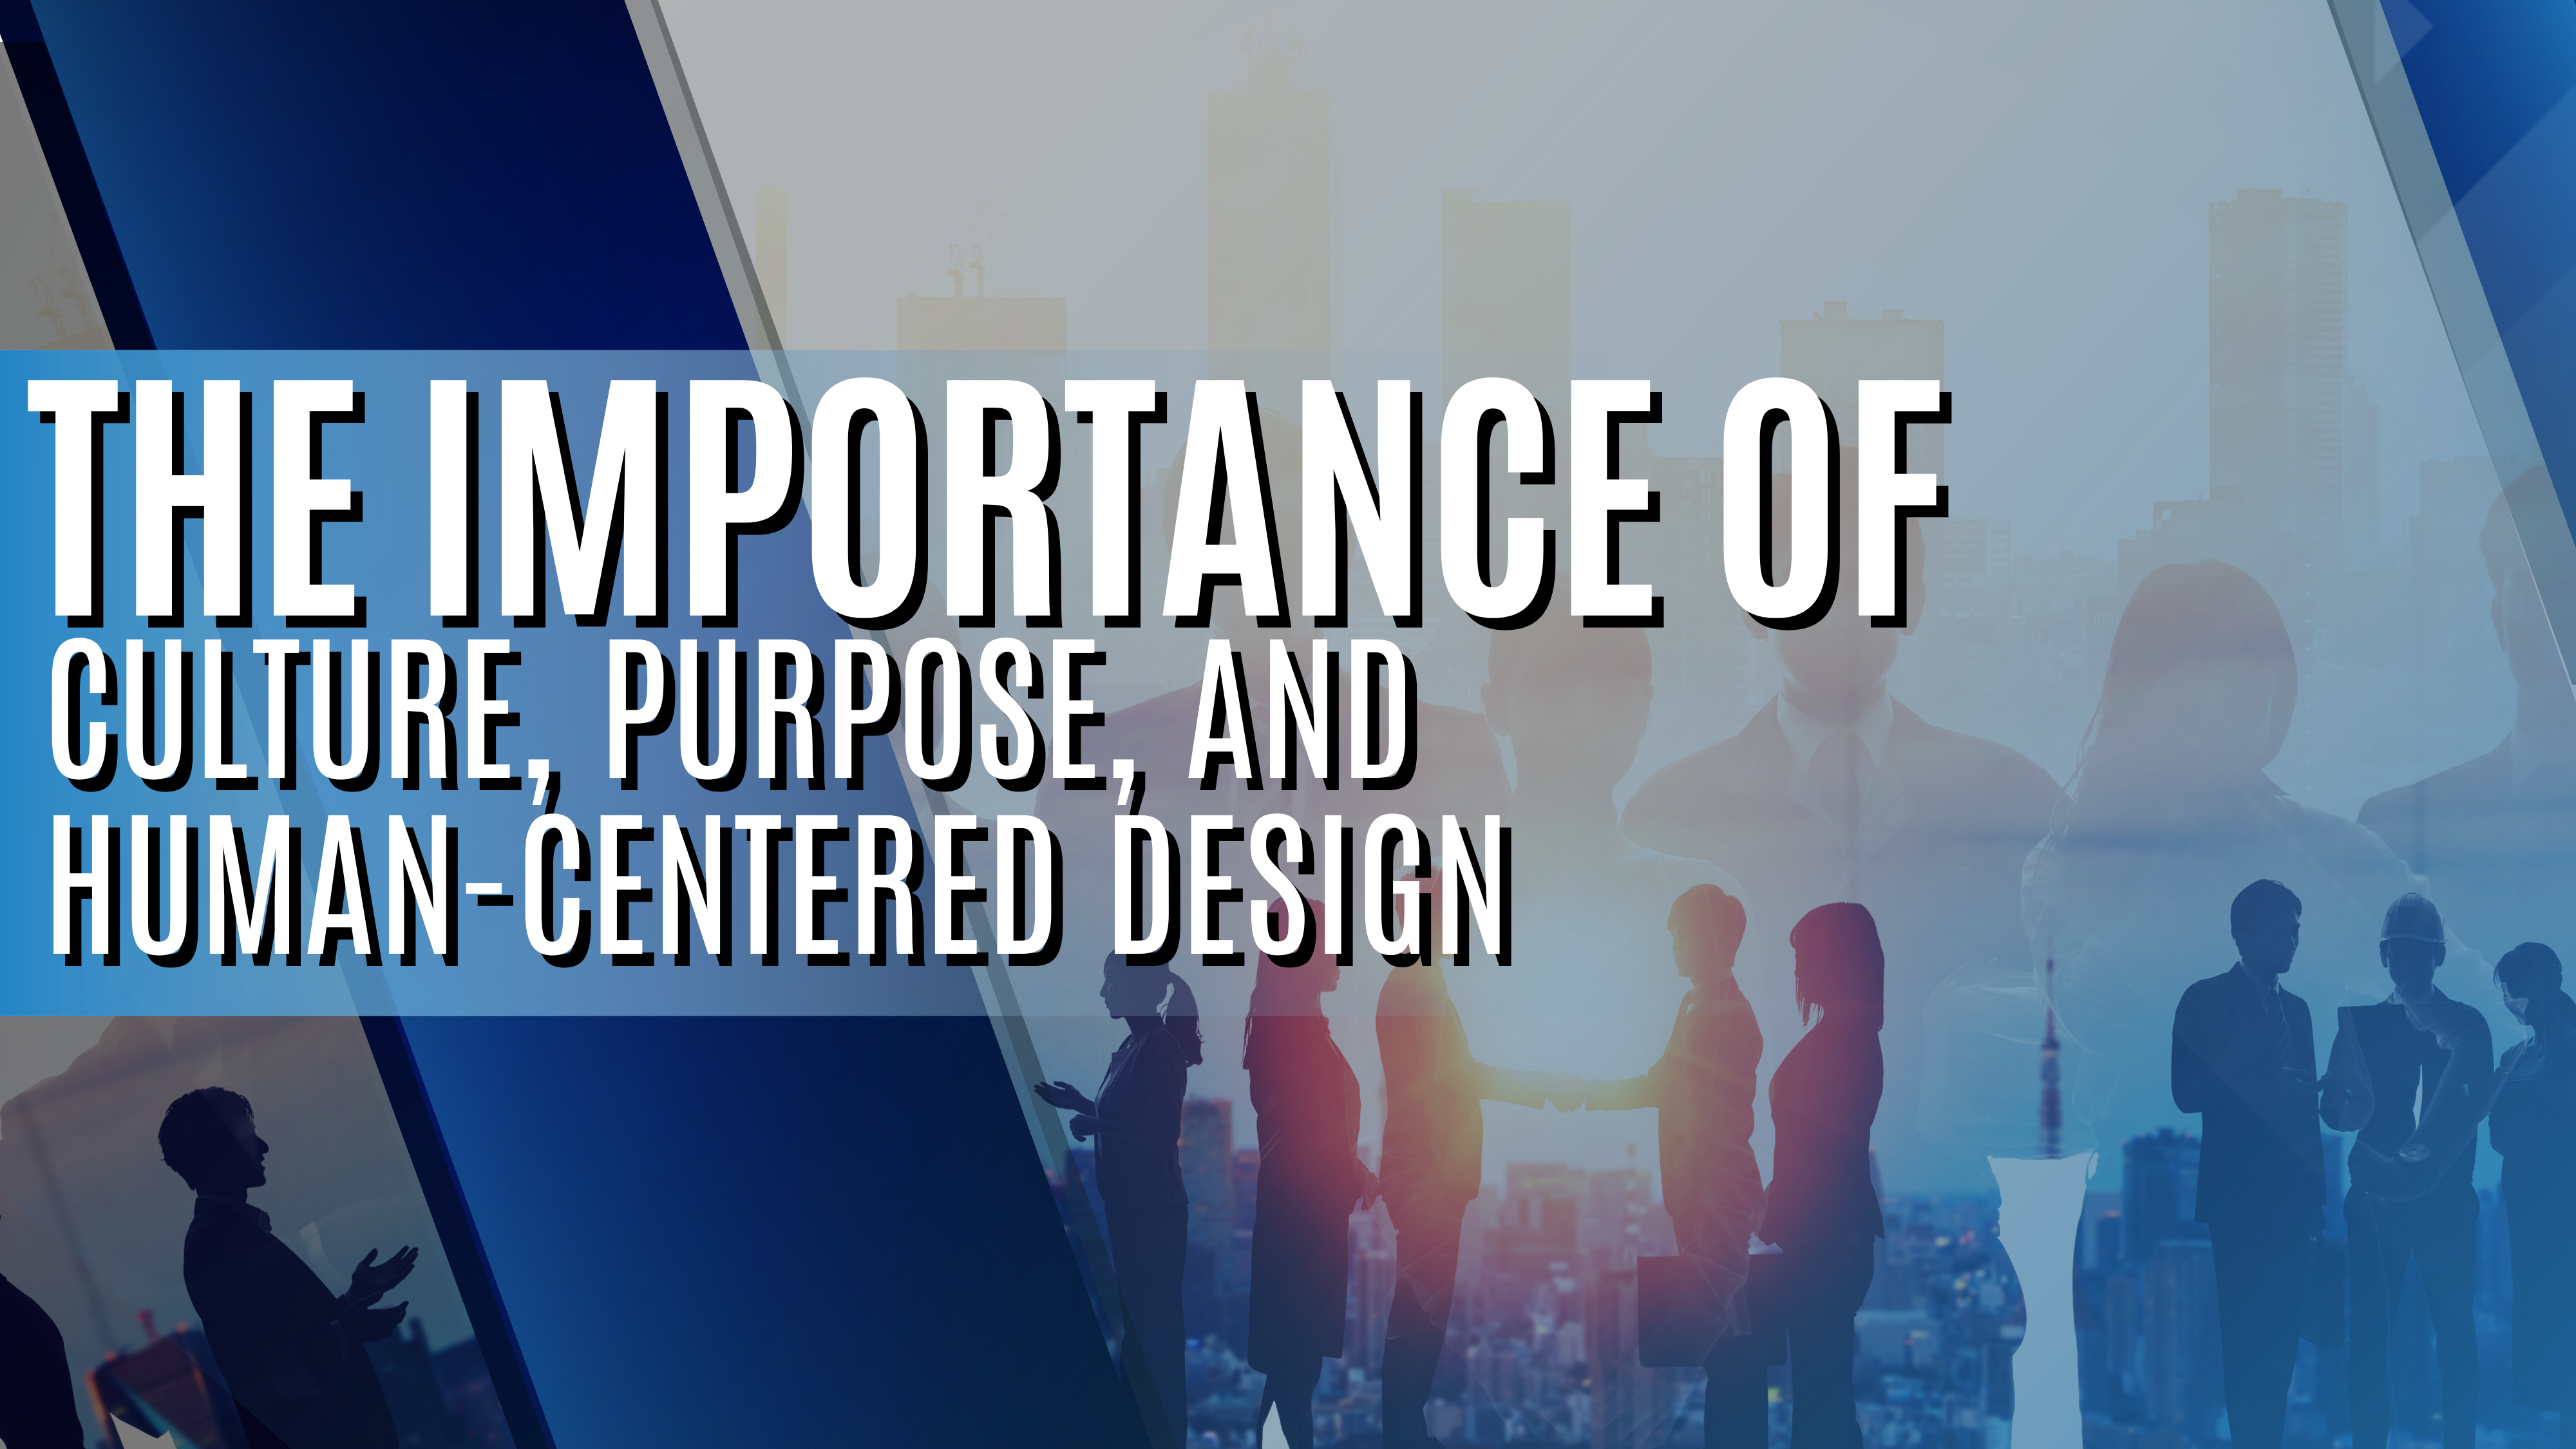 The Importance of Culture, Purpose, and Human-Centered Design